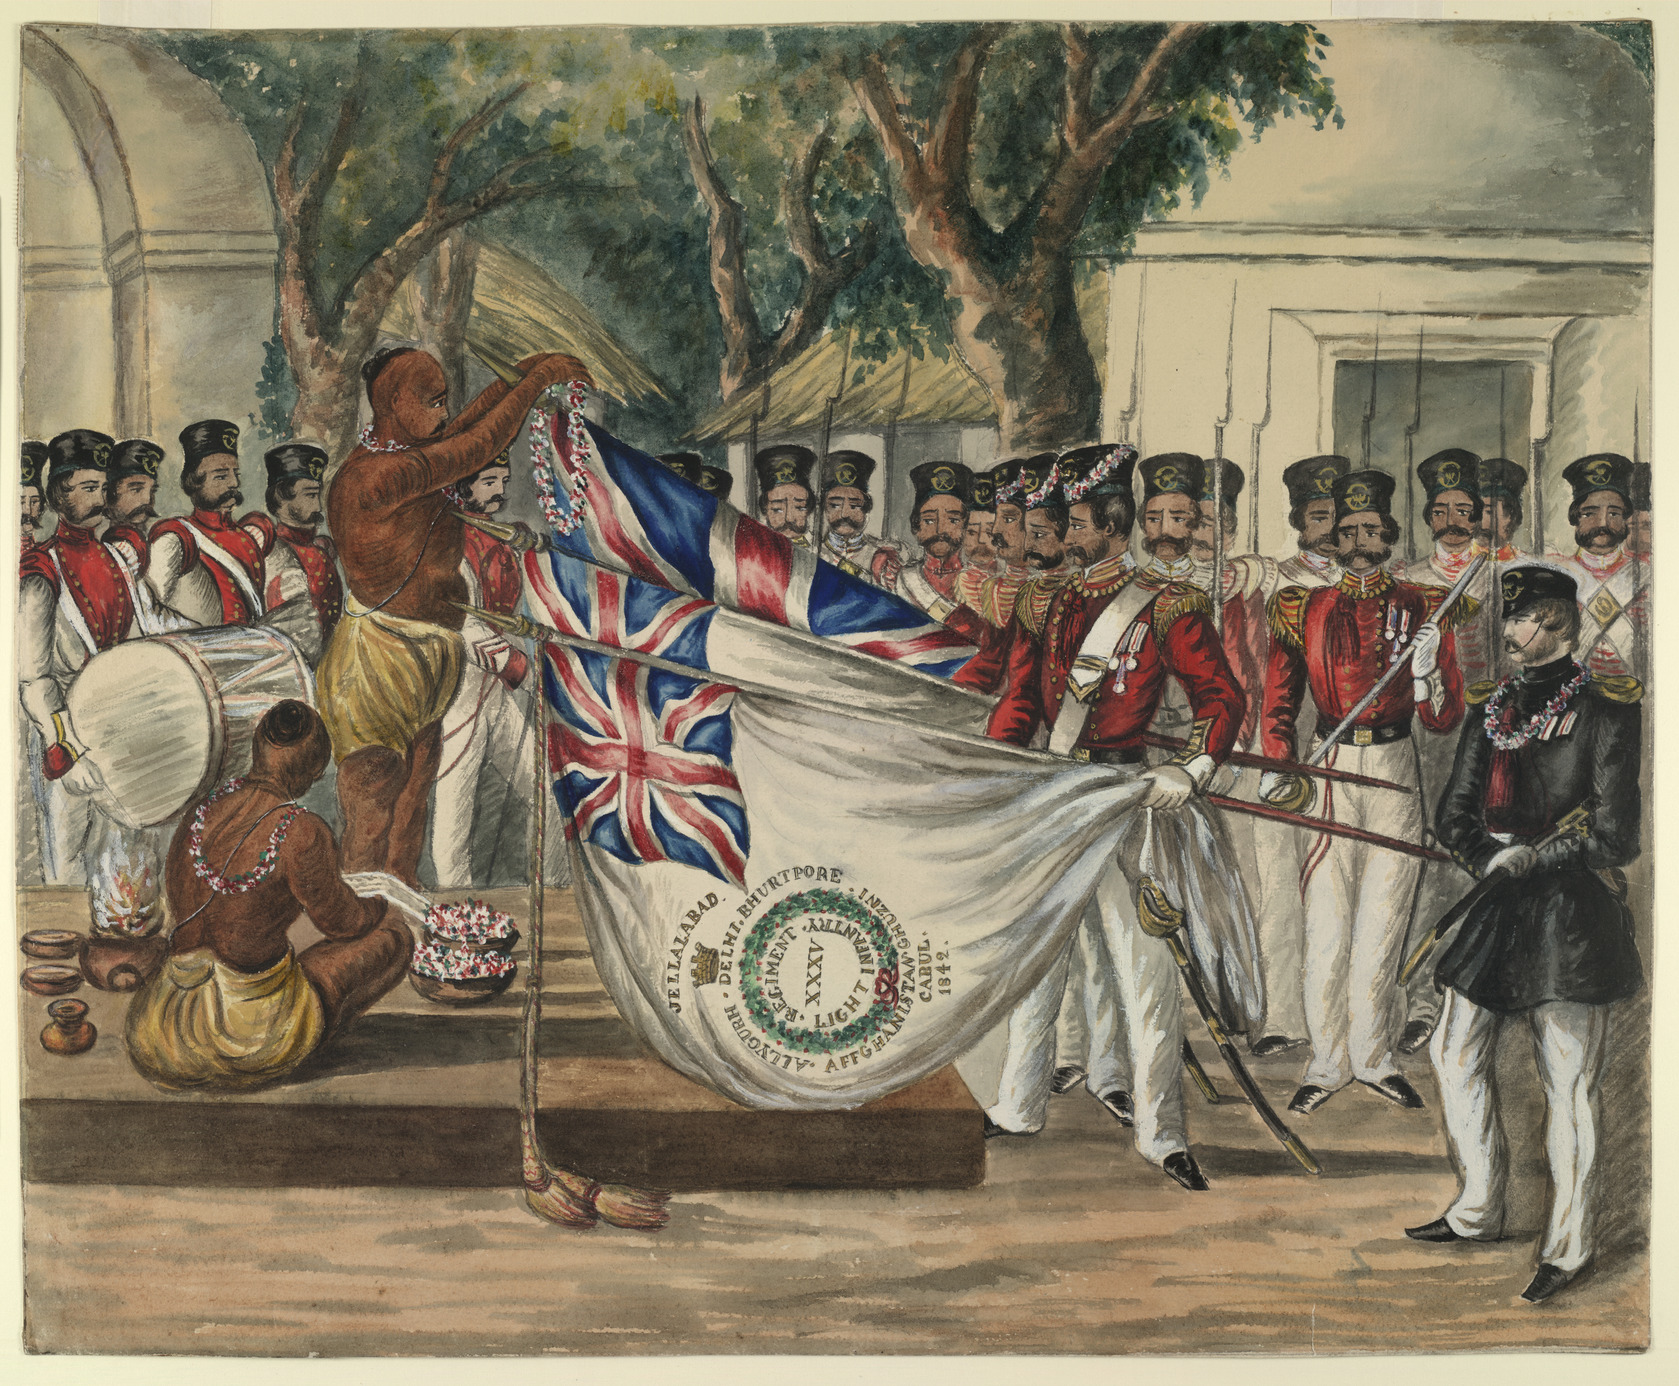 Hindu_priest_garlanding_the_flags_of_the_35th_Bengal_Light_Infantry_(c.1847)_-_BL_Add.Or.741.jpg